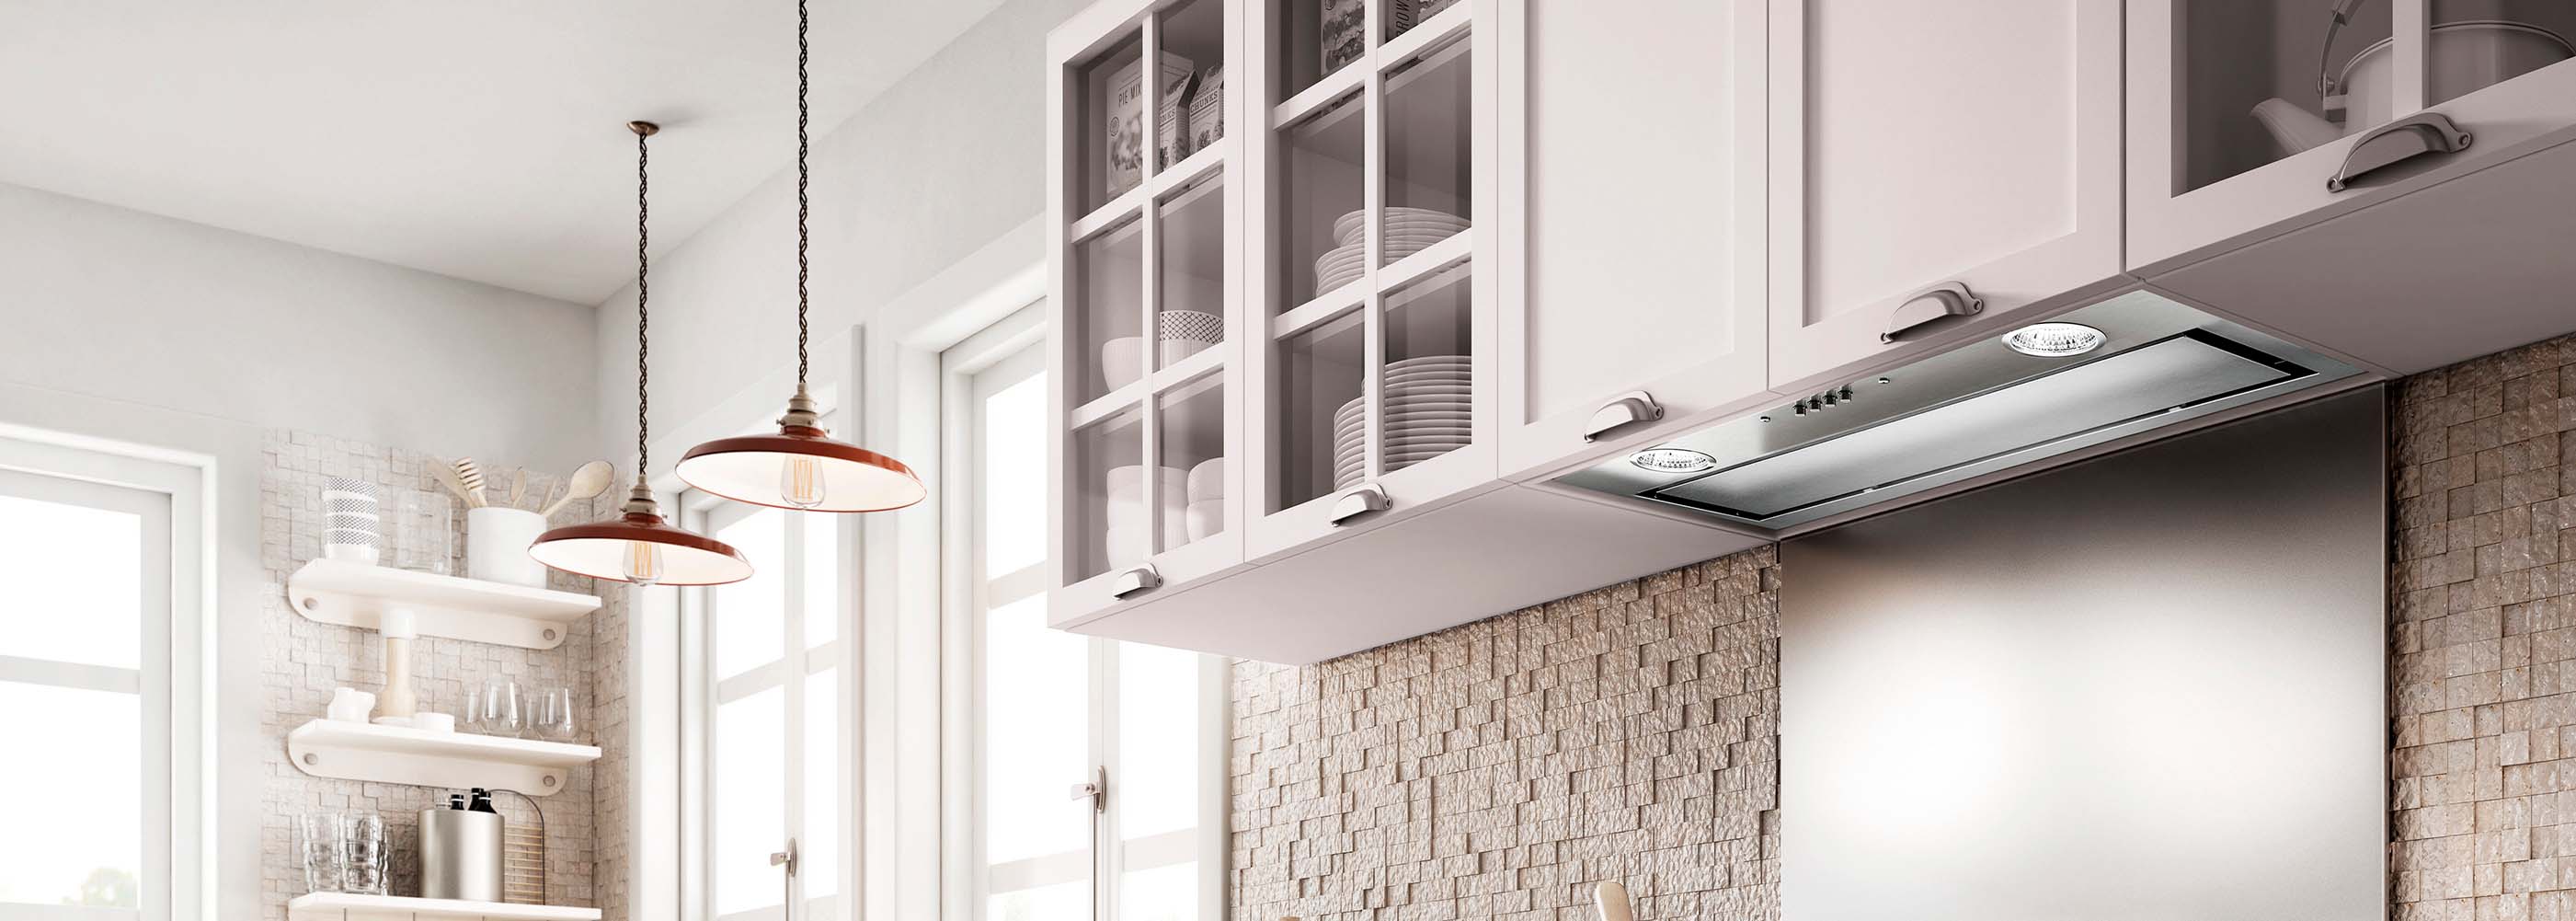 THE AMAZING TECHNOLOGY OF THE UMBRIA RANGE HOOD COMES TO UPGRADE YOUR KITCHEN